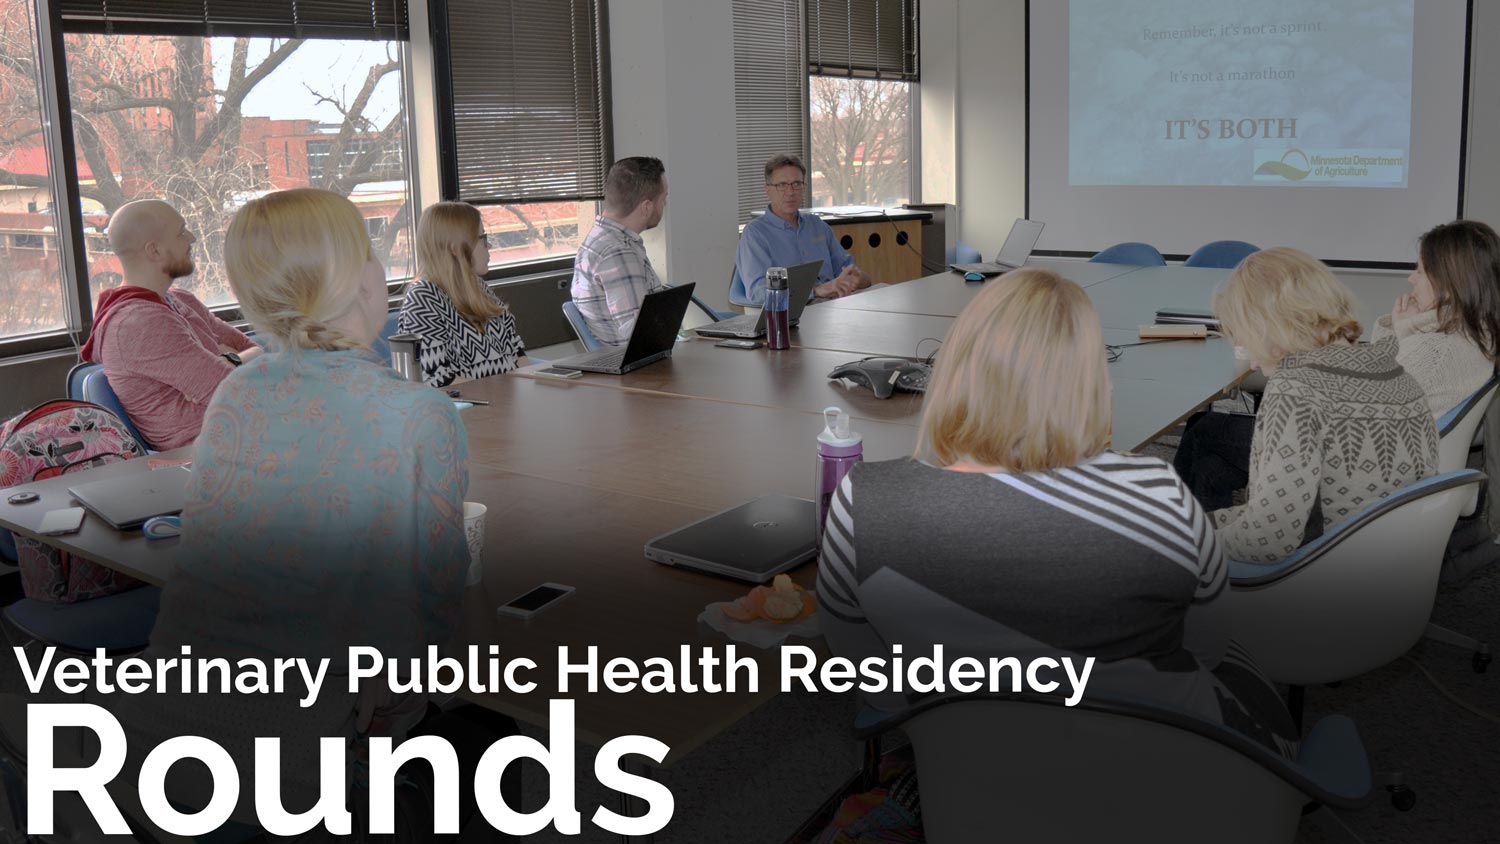 residents listening to a rounds presentation; text on image says "Veterinary Public Health Residency Rounds"